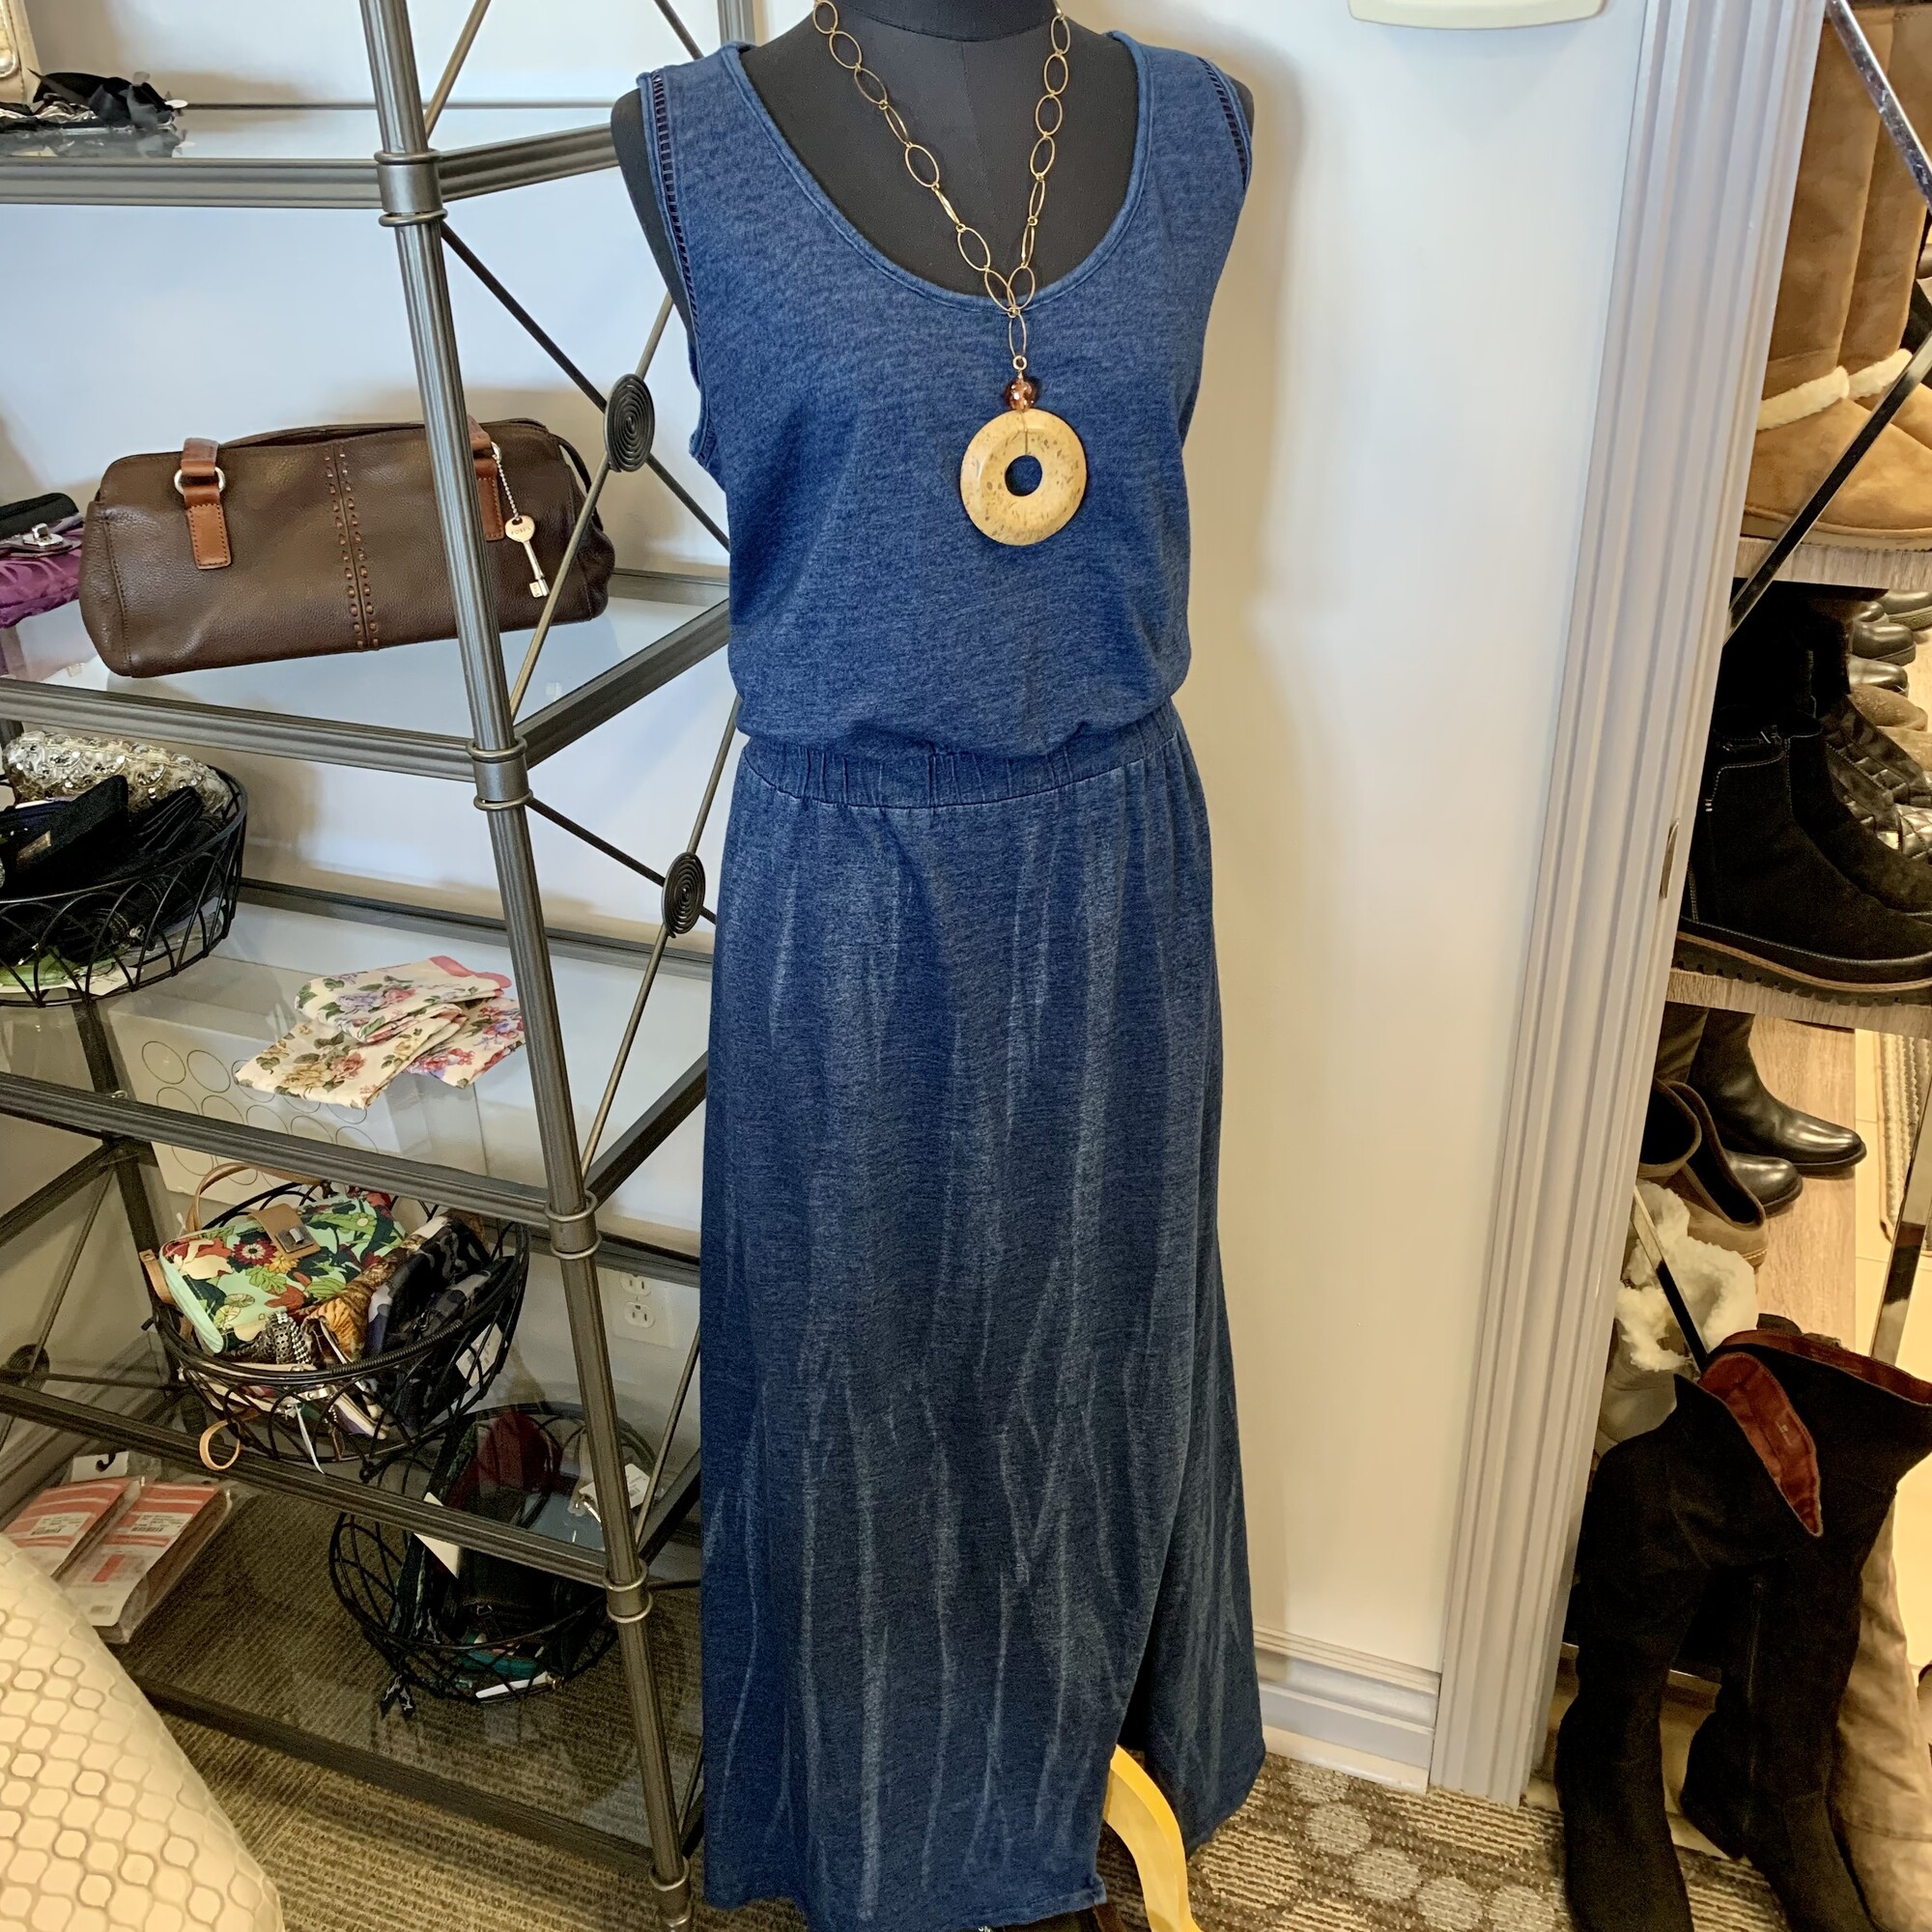 Dkny Dress Jersey Maxi,
Colour: Blue,
Size: XLarge,
With split on the side,
Perfect beach dress